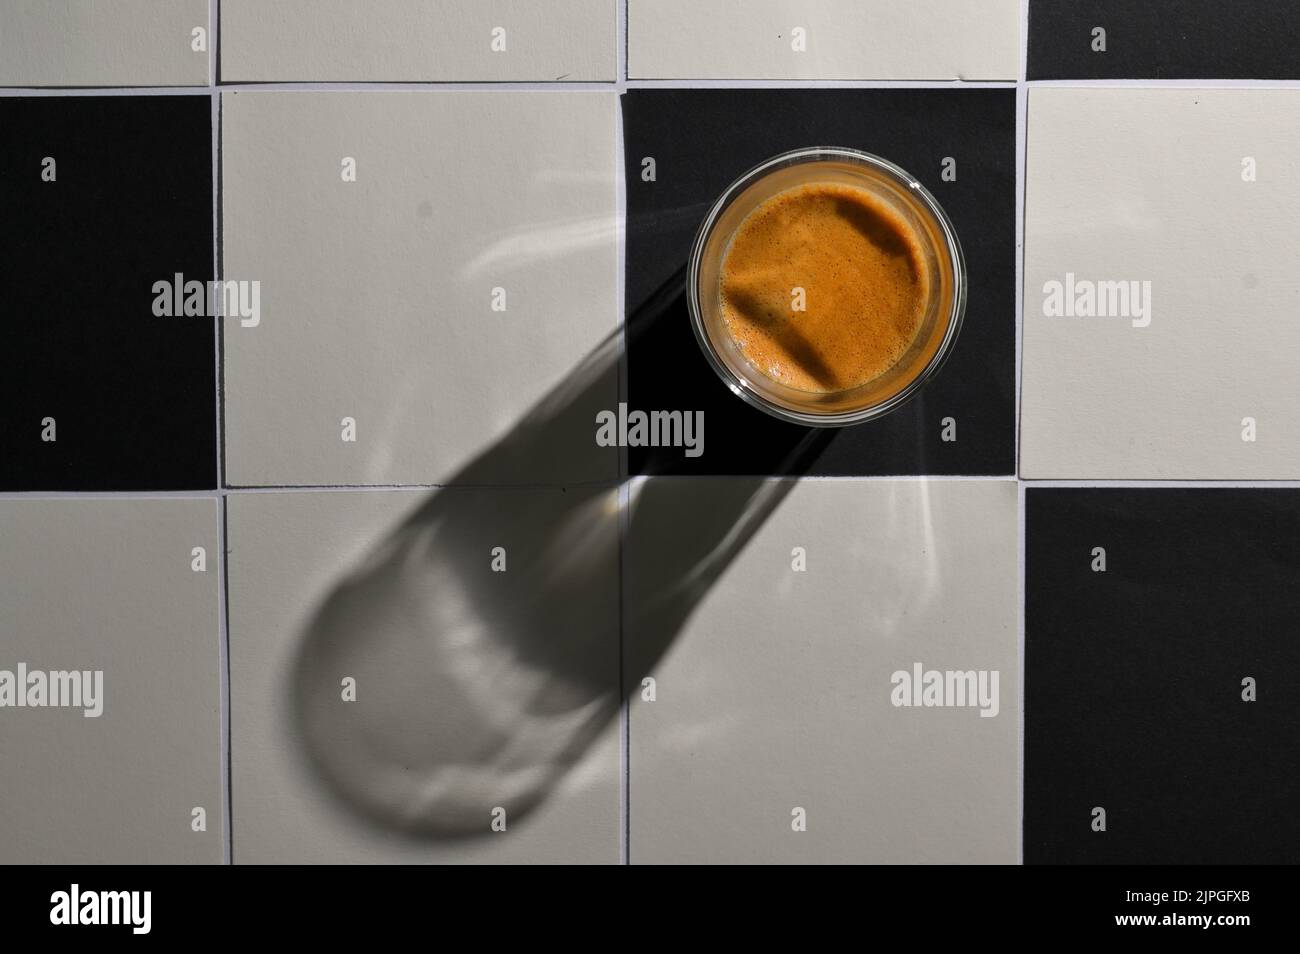 White And Black Square Tiled Paper and Espresso Cup with Shadow Stock Photo